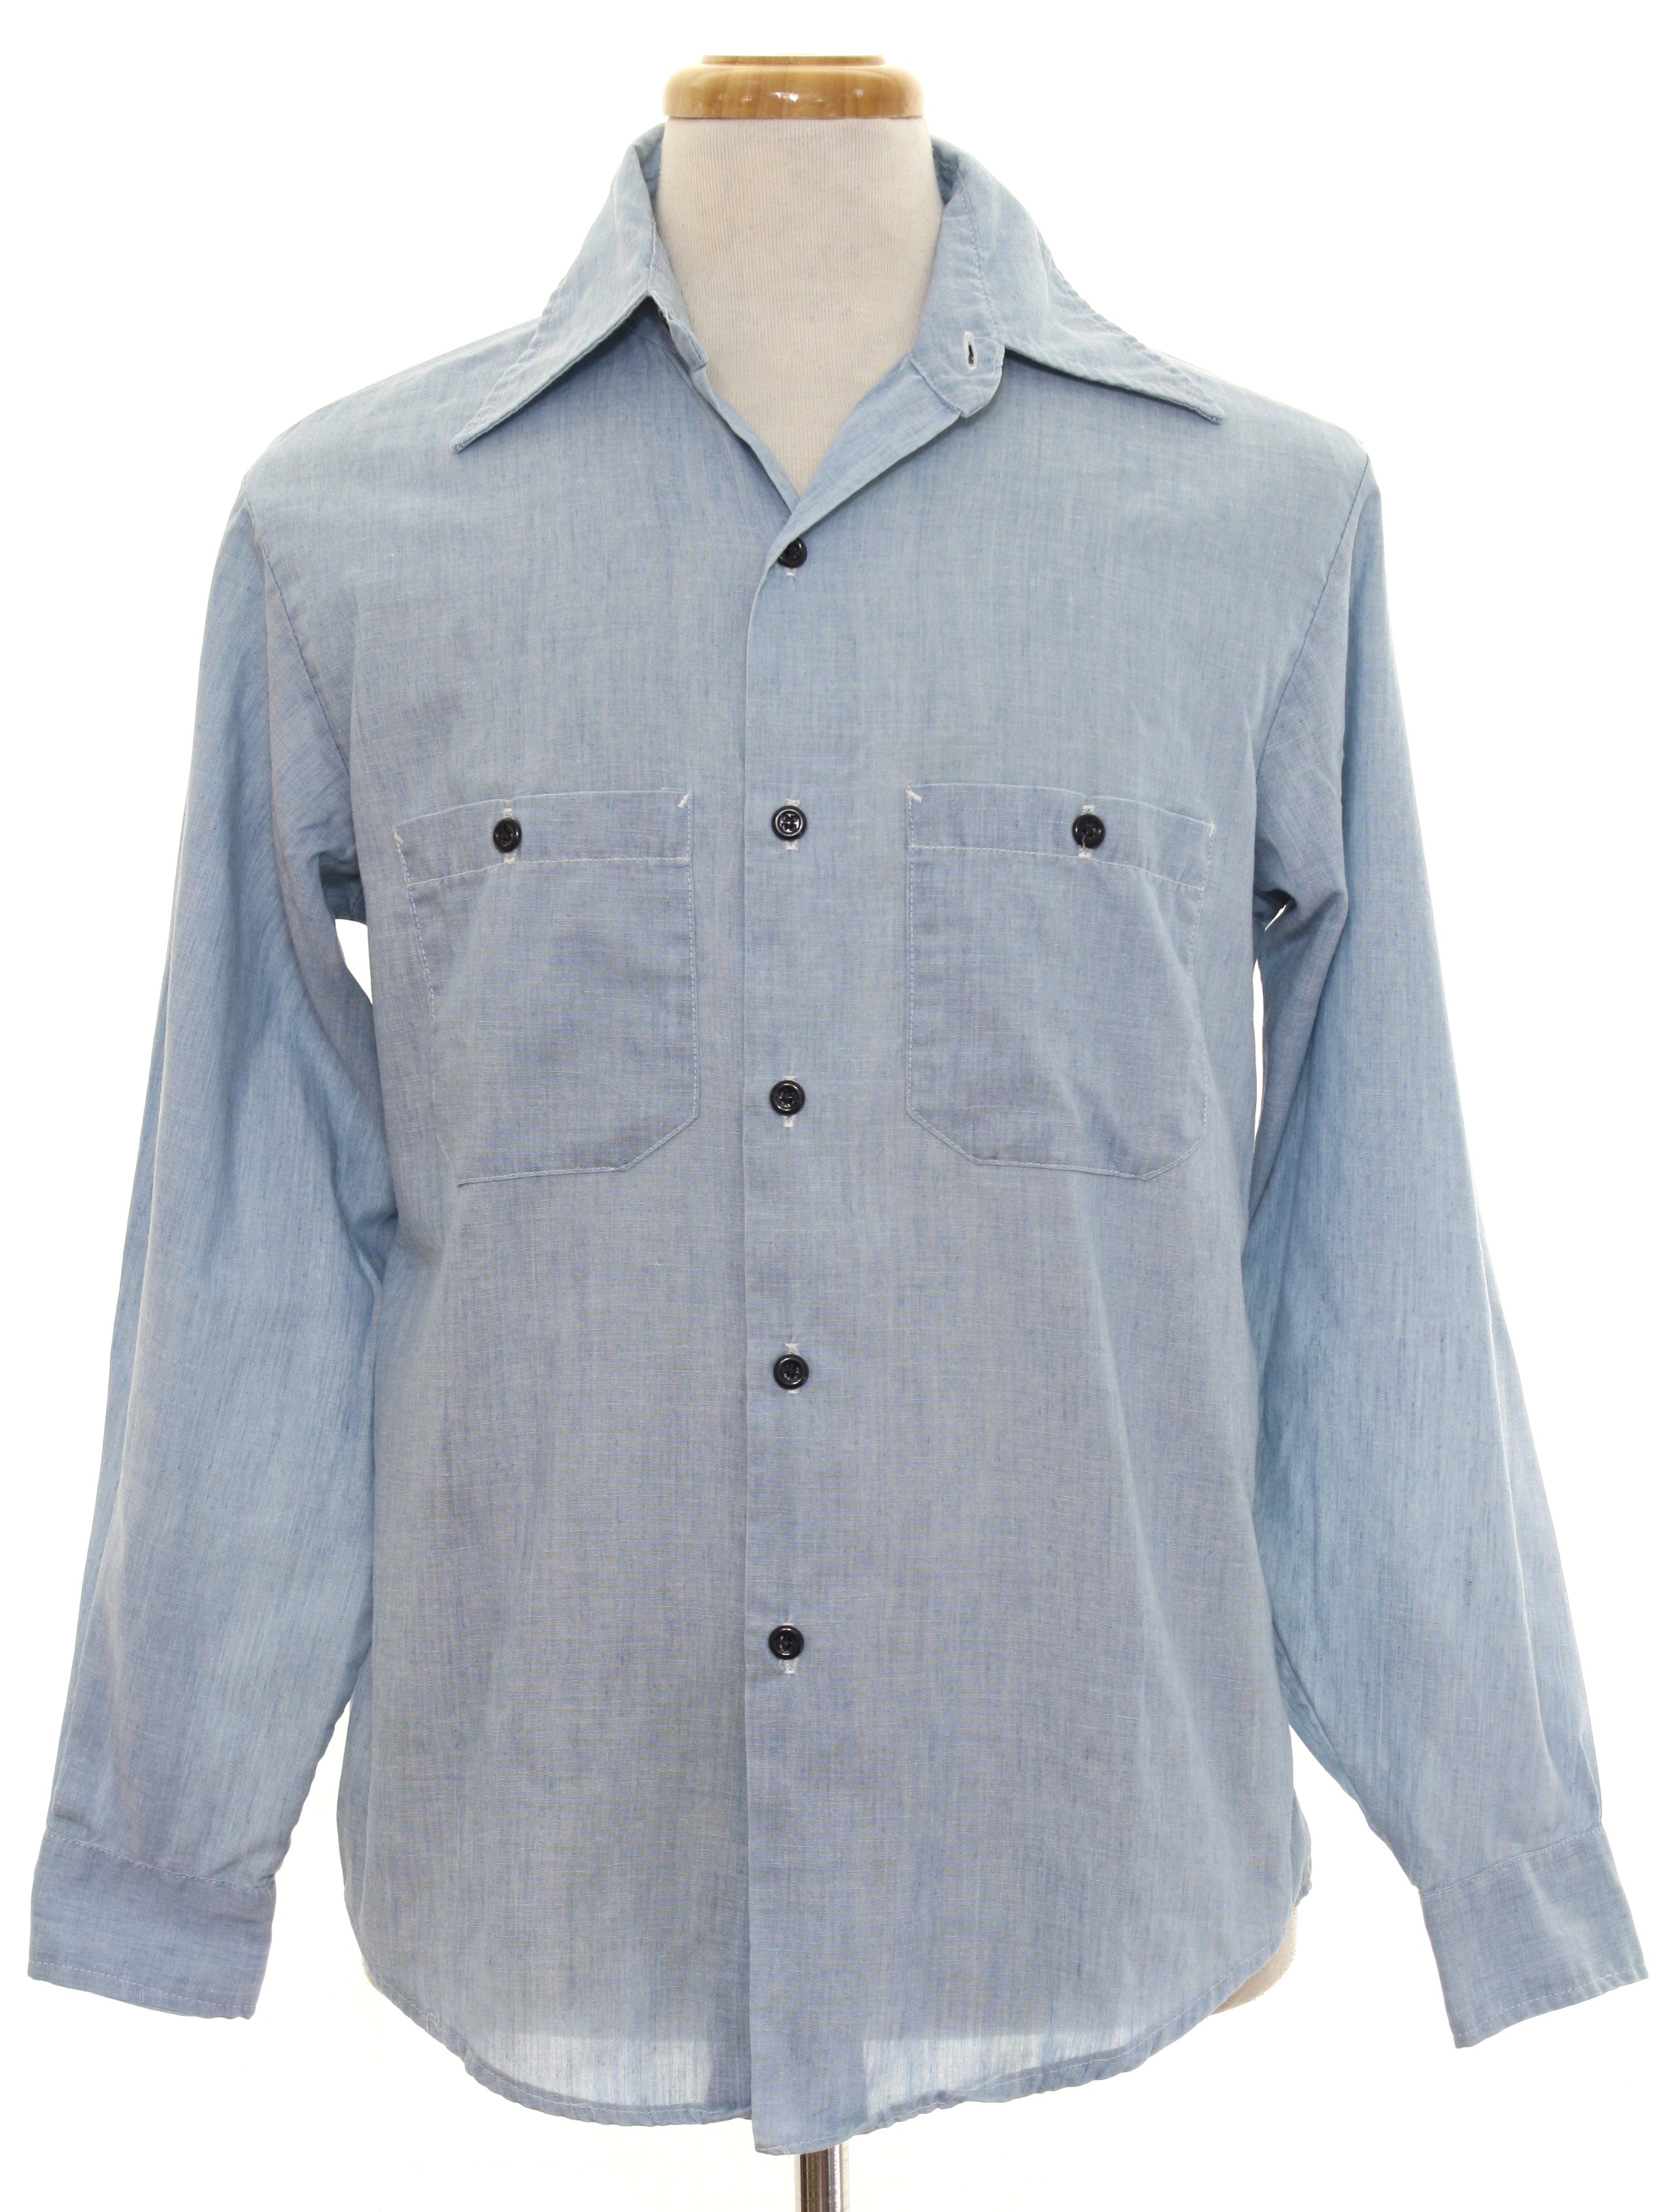 1970's Vintage Sears Shirt: Late 70s or Early 80s -Sears- Mens chambray ...